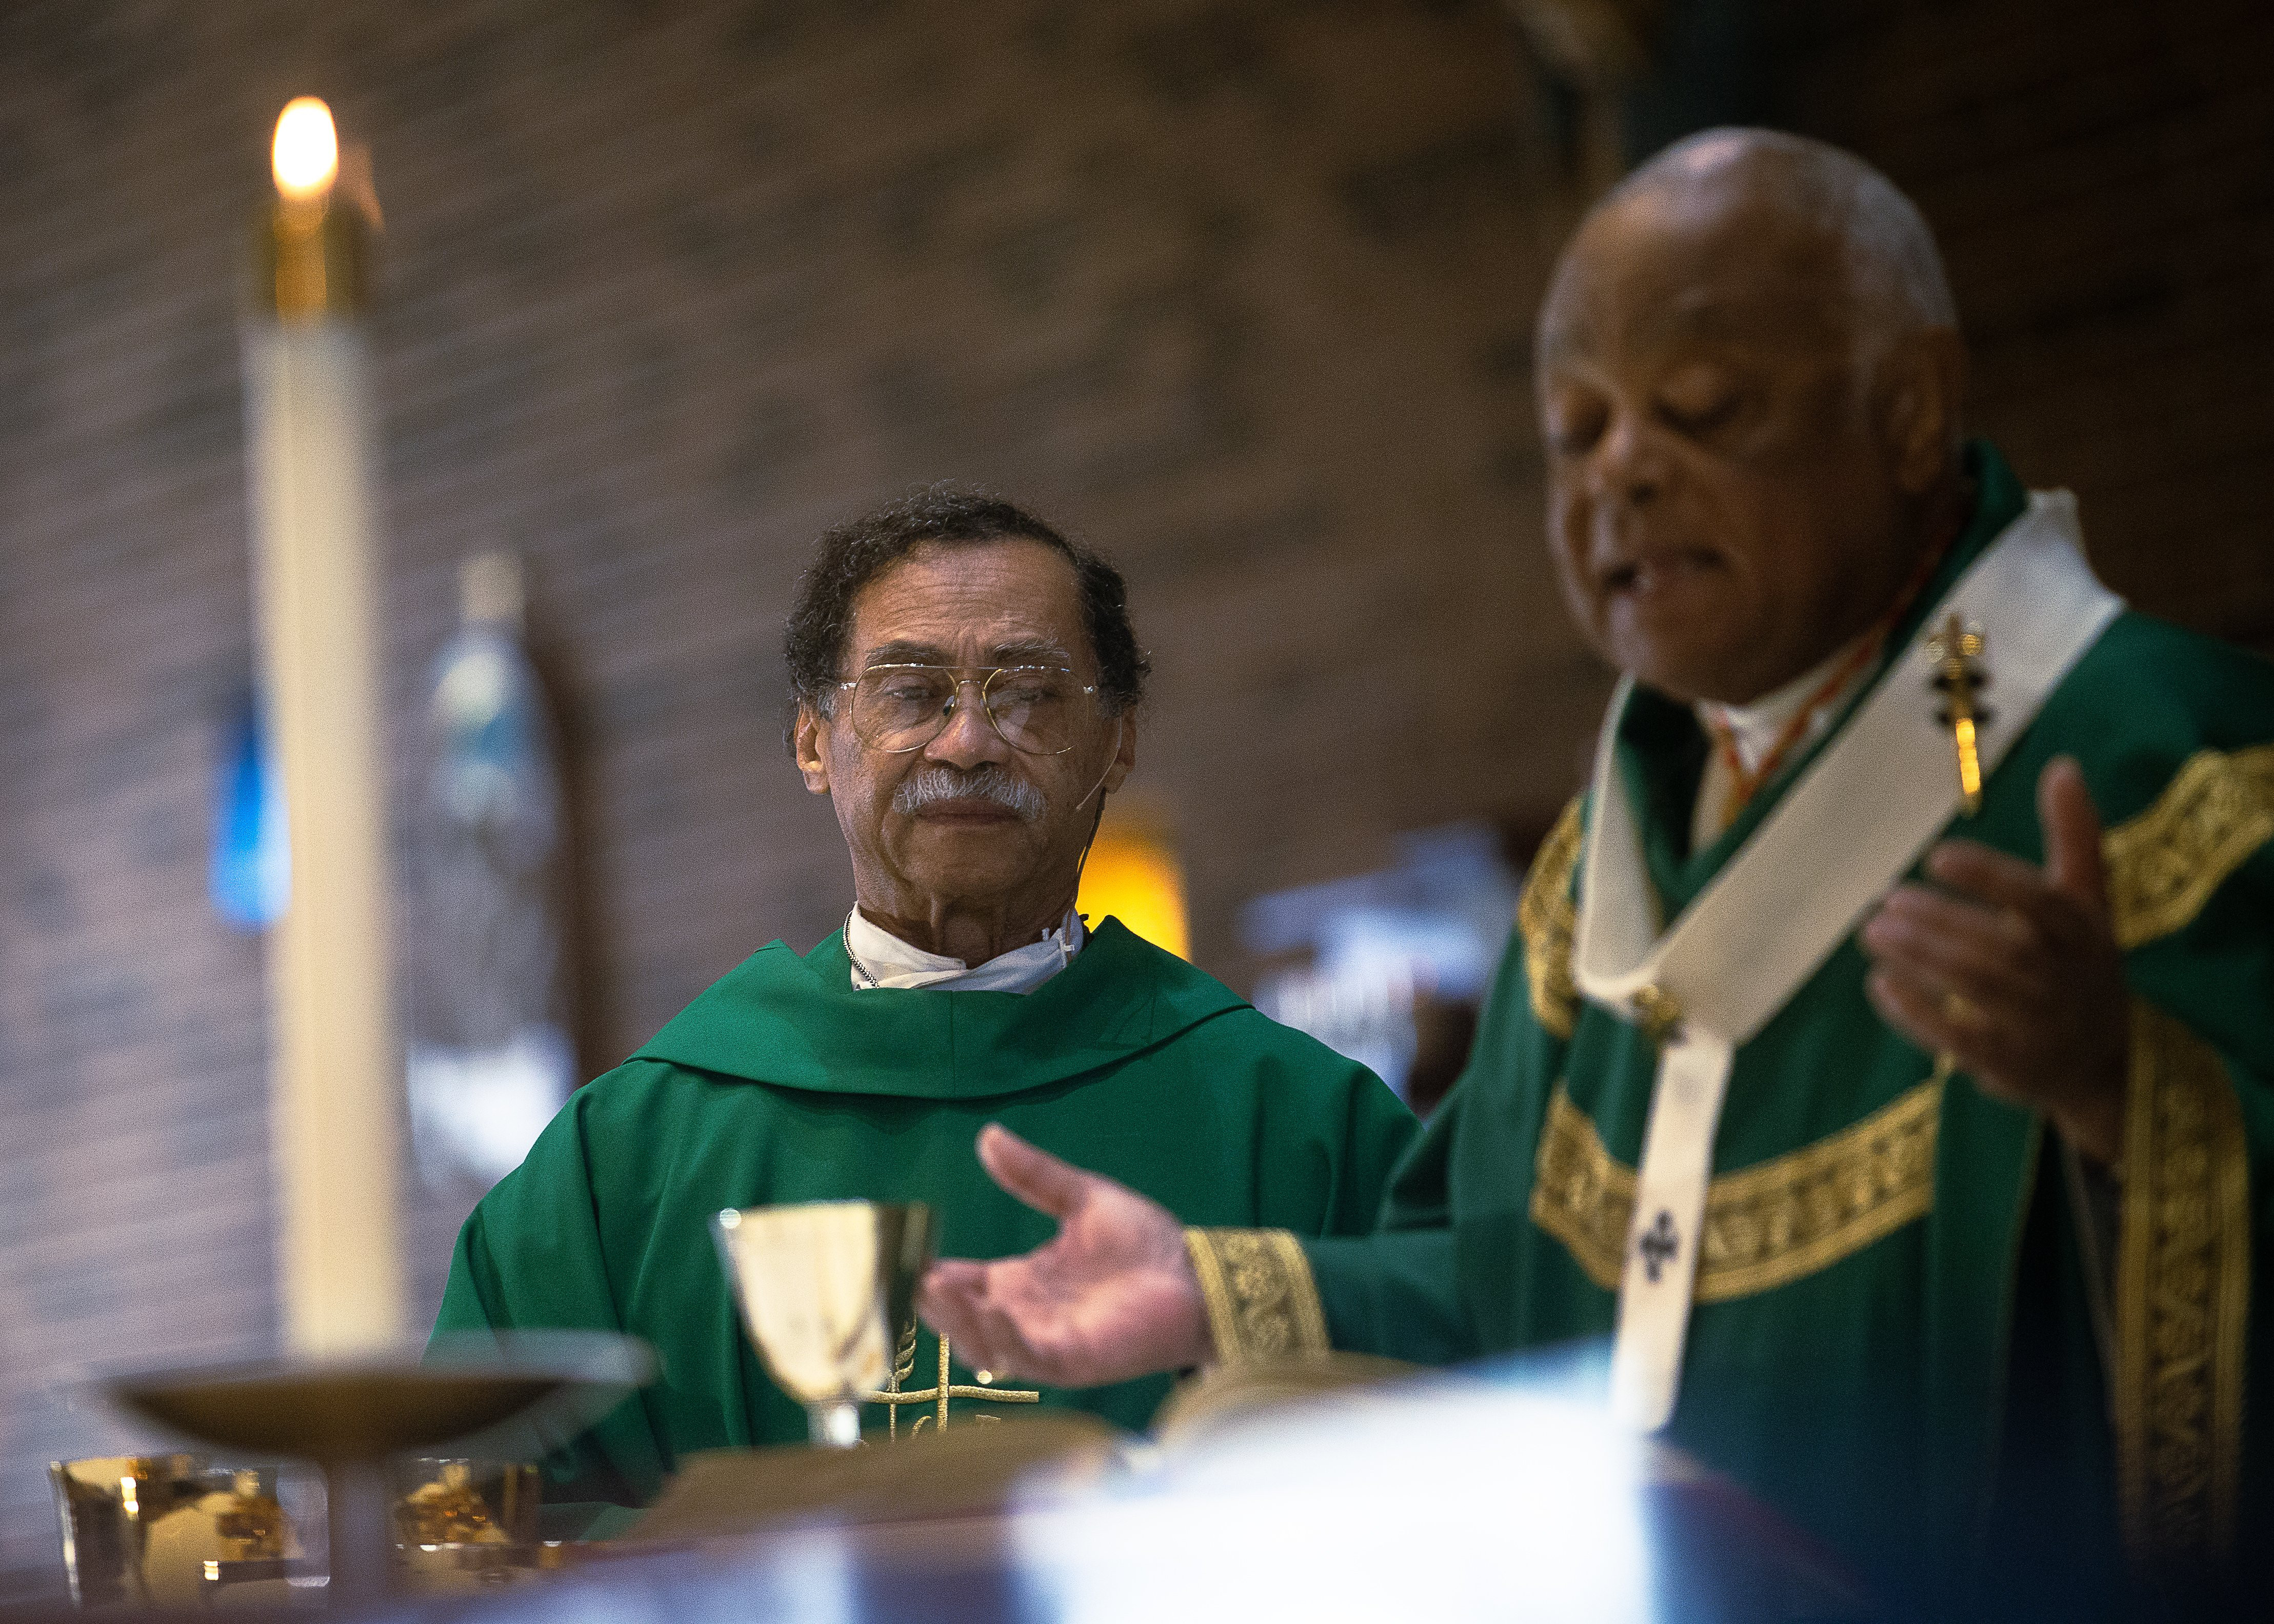 Washington Cardinal Wilton Gregory celebrates the annual Mass commemorating the legacy of the Rev. Martin Luther King Jr. on Jan. 15, 2023 at St. Joseph Church in Upper Marlboro, Maryland. At left is Washington Auxiliary Bishop Roy Campbell Jr., the pastor of St. Joseph's who concelebrated the Mass sponsored by the Office of Cultural Diversity of the archdiocese. (OSV News photo/Tyler Orsburn, Catholic Standard)